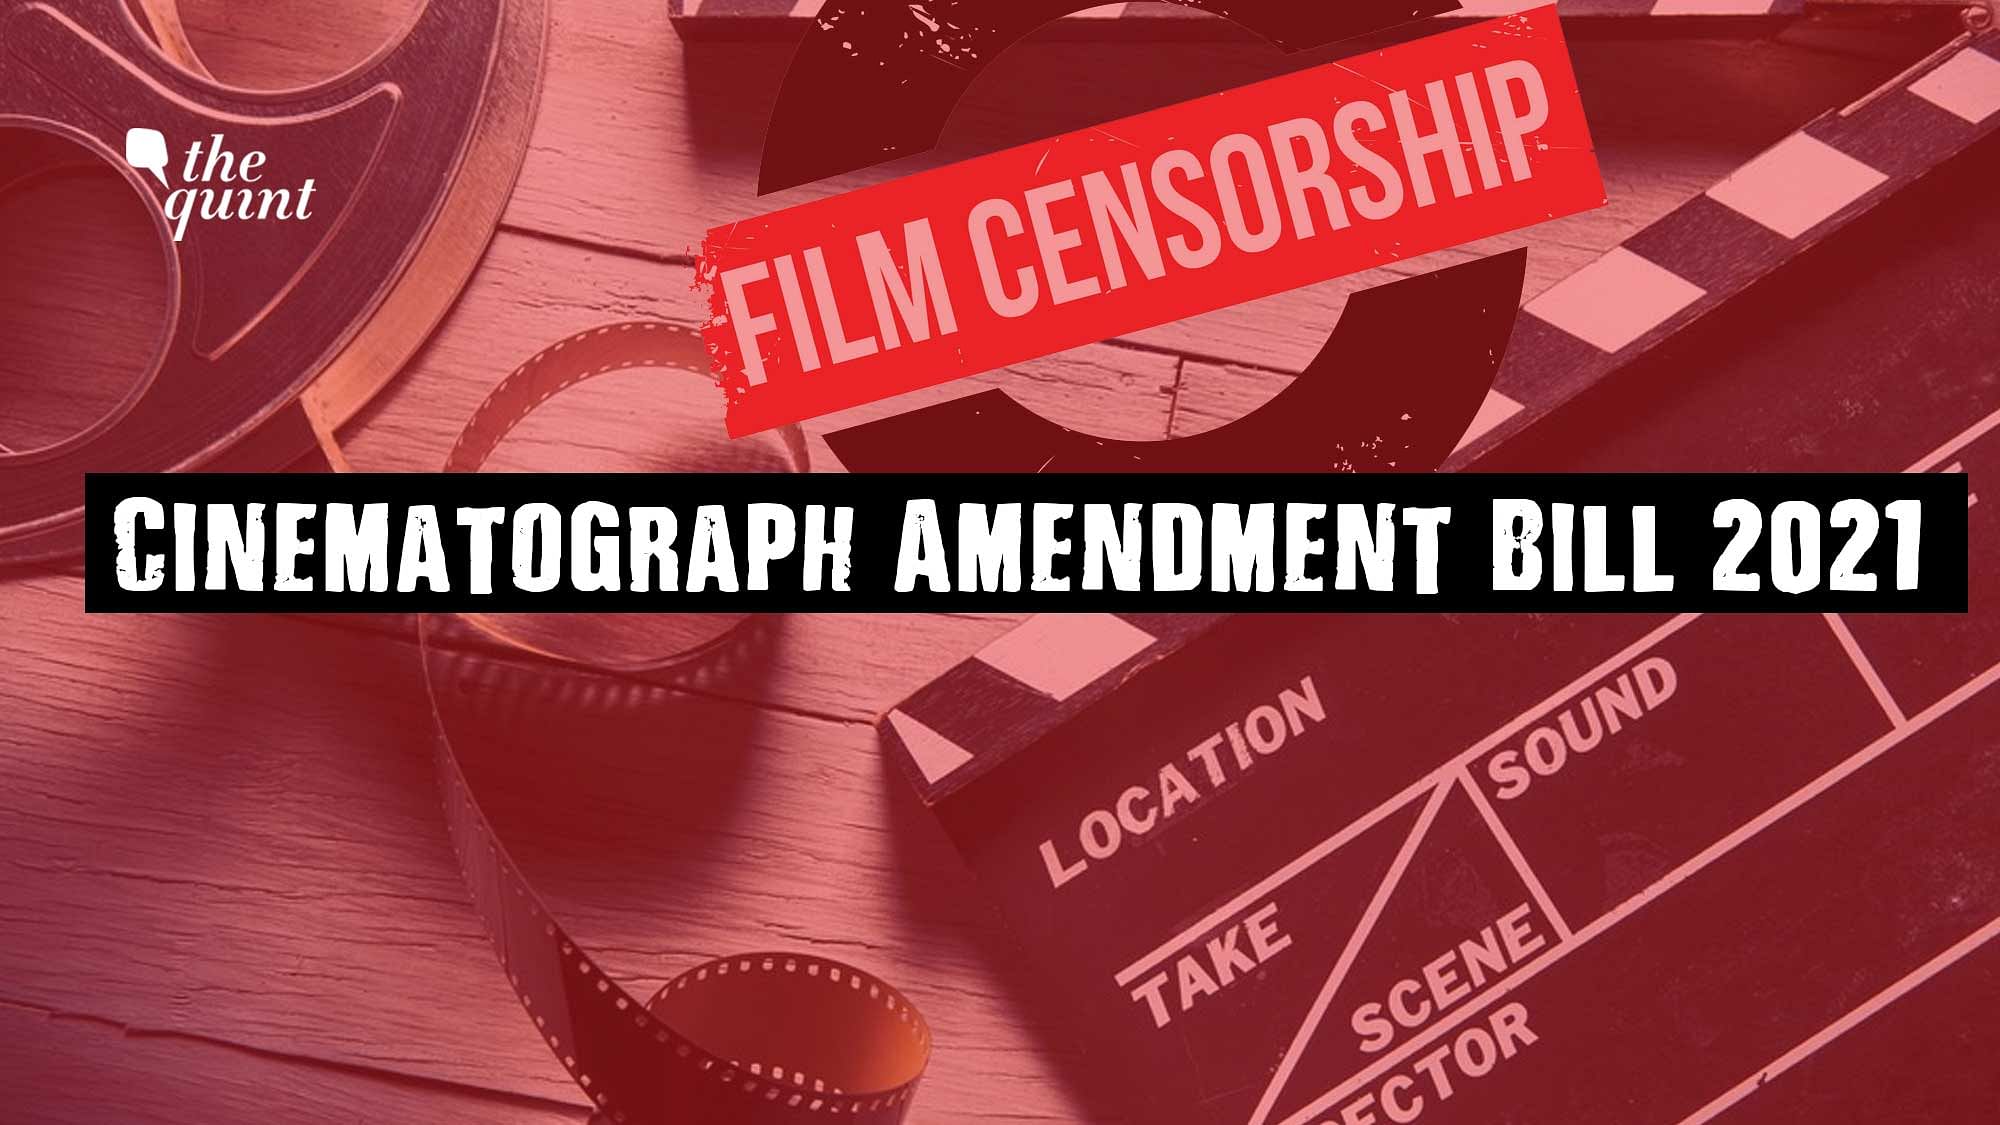 Centre proposes new changes to Cinematograph Act to widen its power to censor films